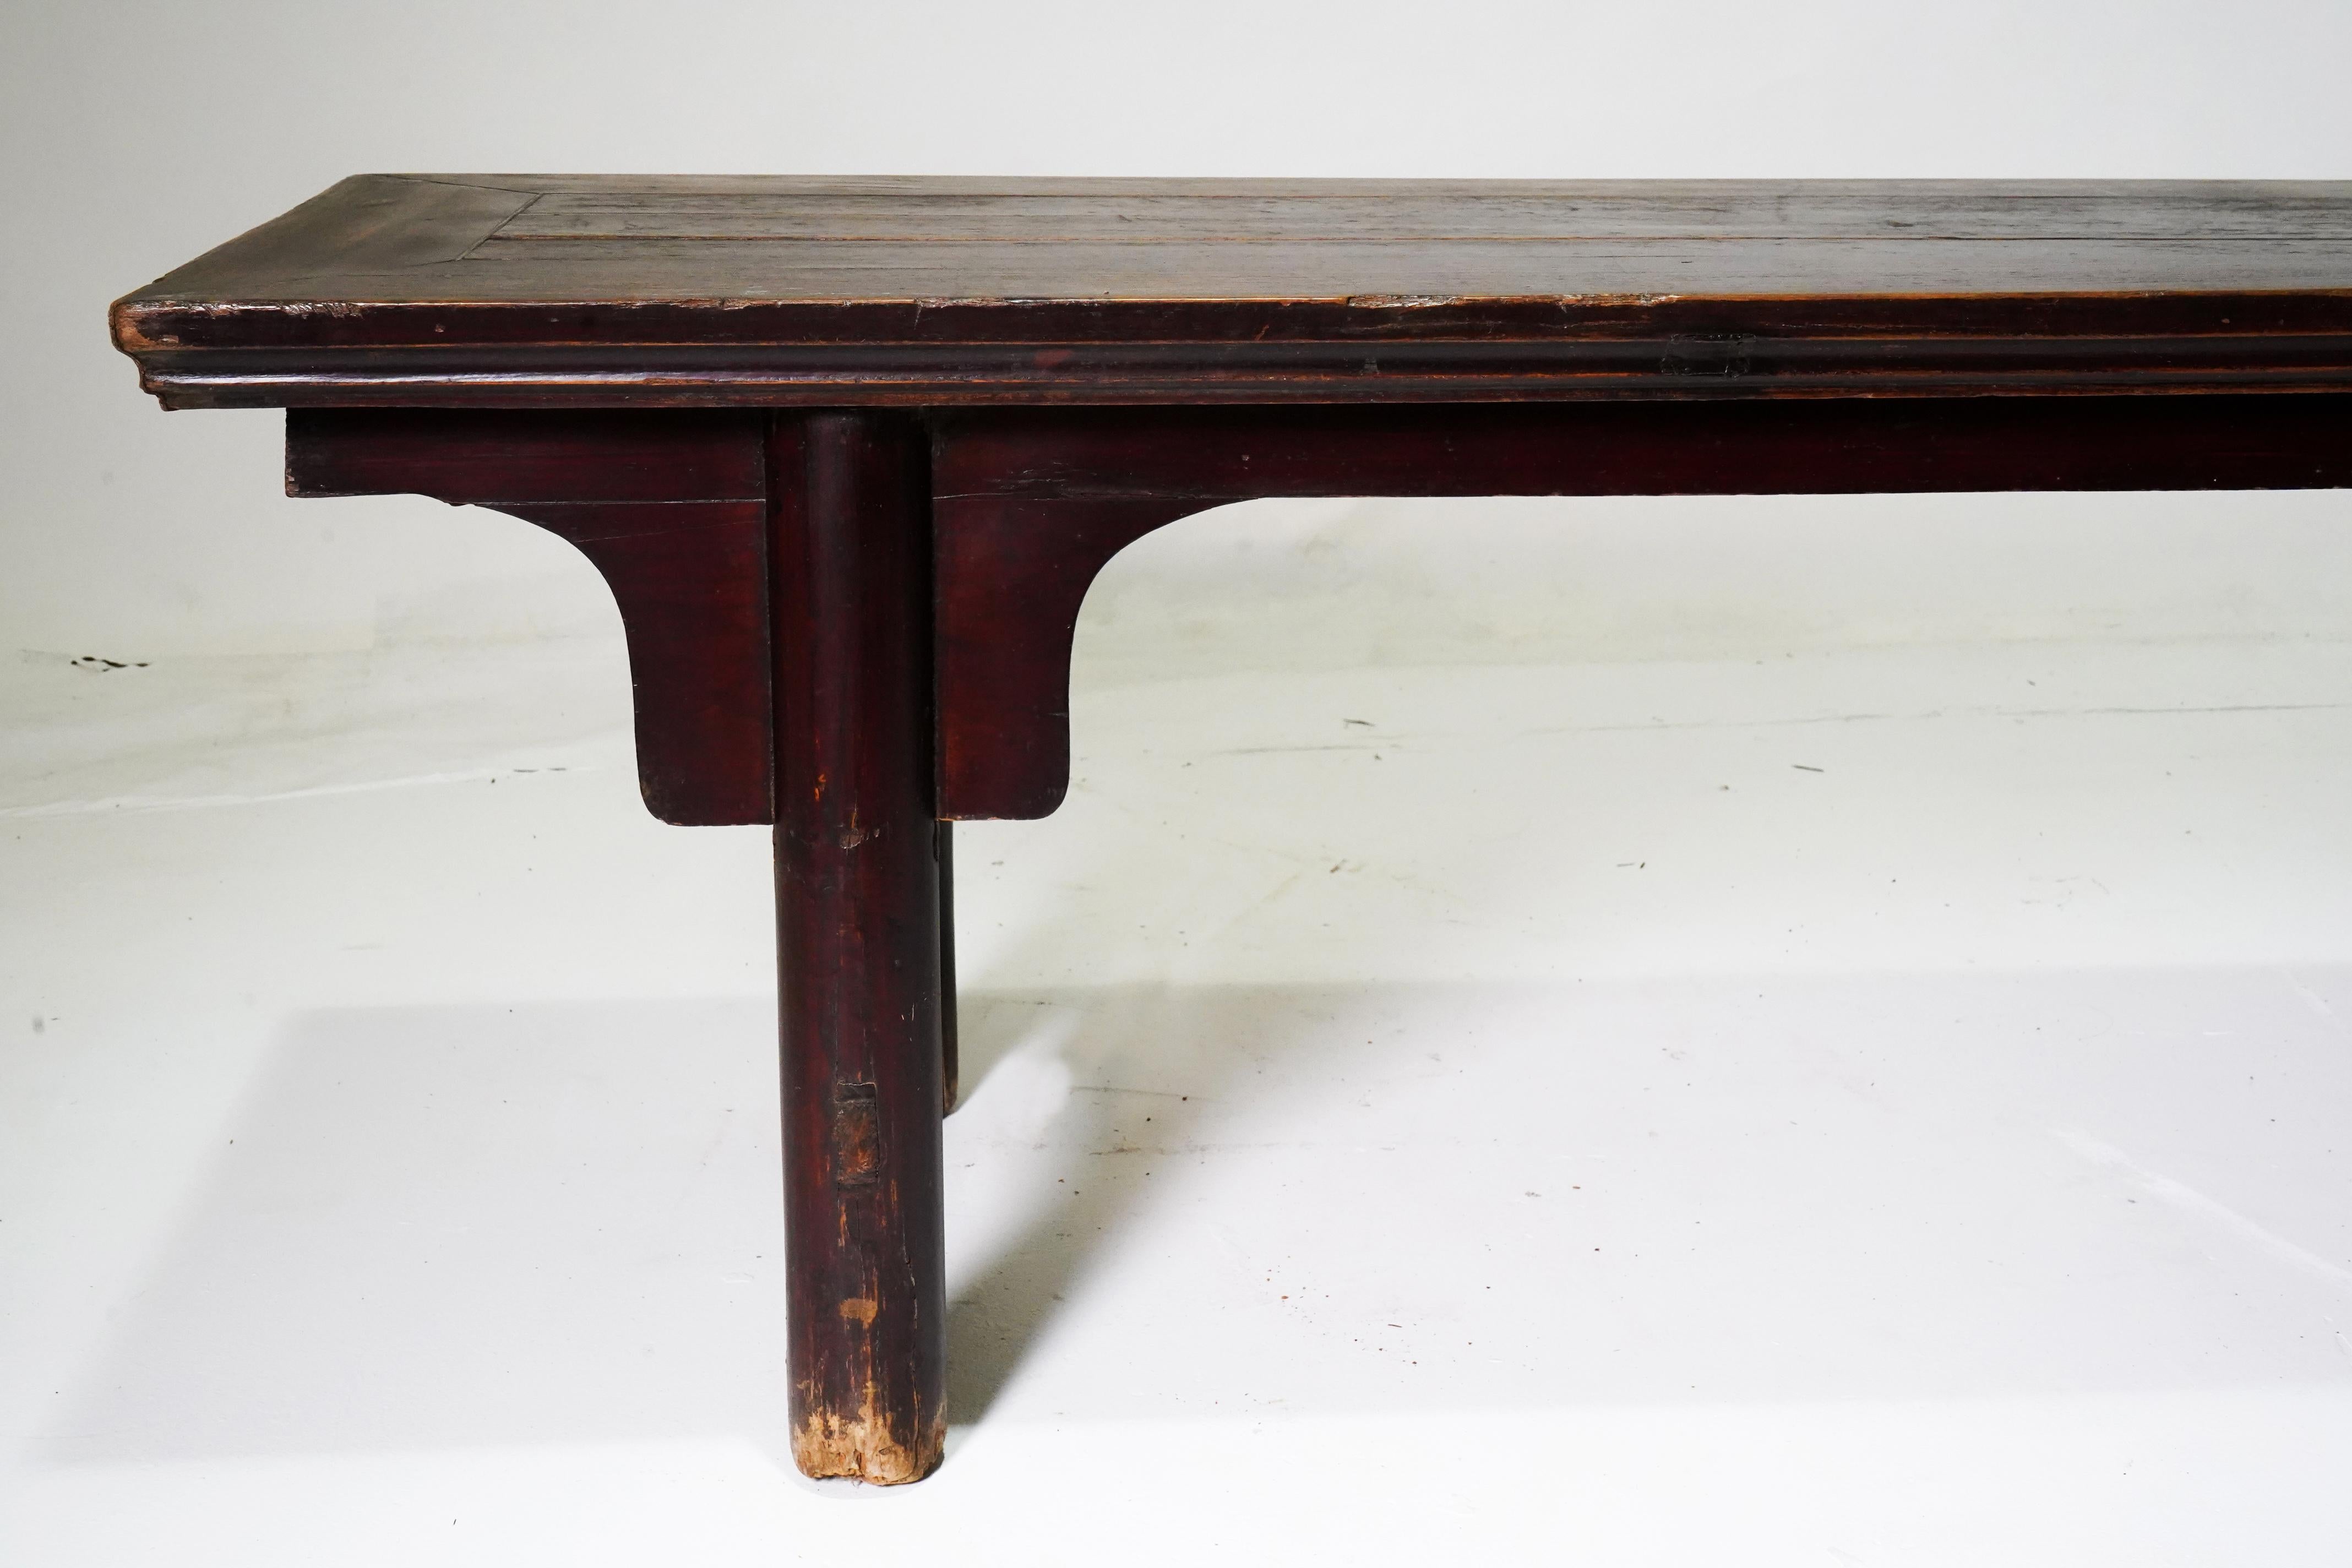 20th Century C. 1900 Chinese Long Bench with Round Legs And Original Patina